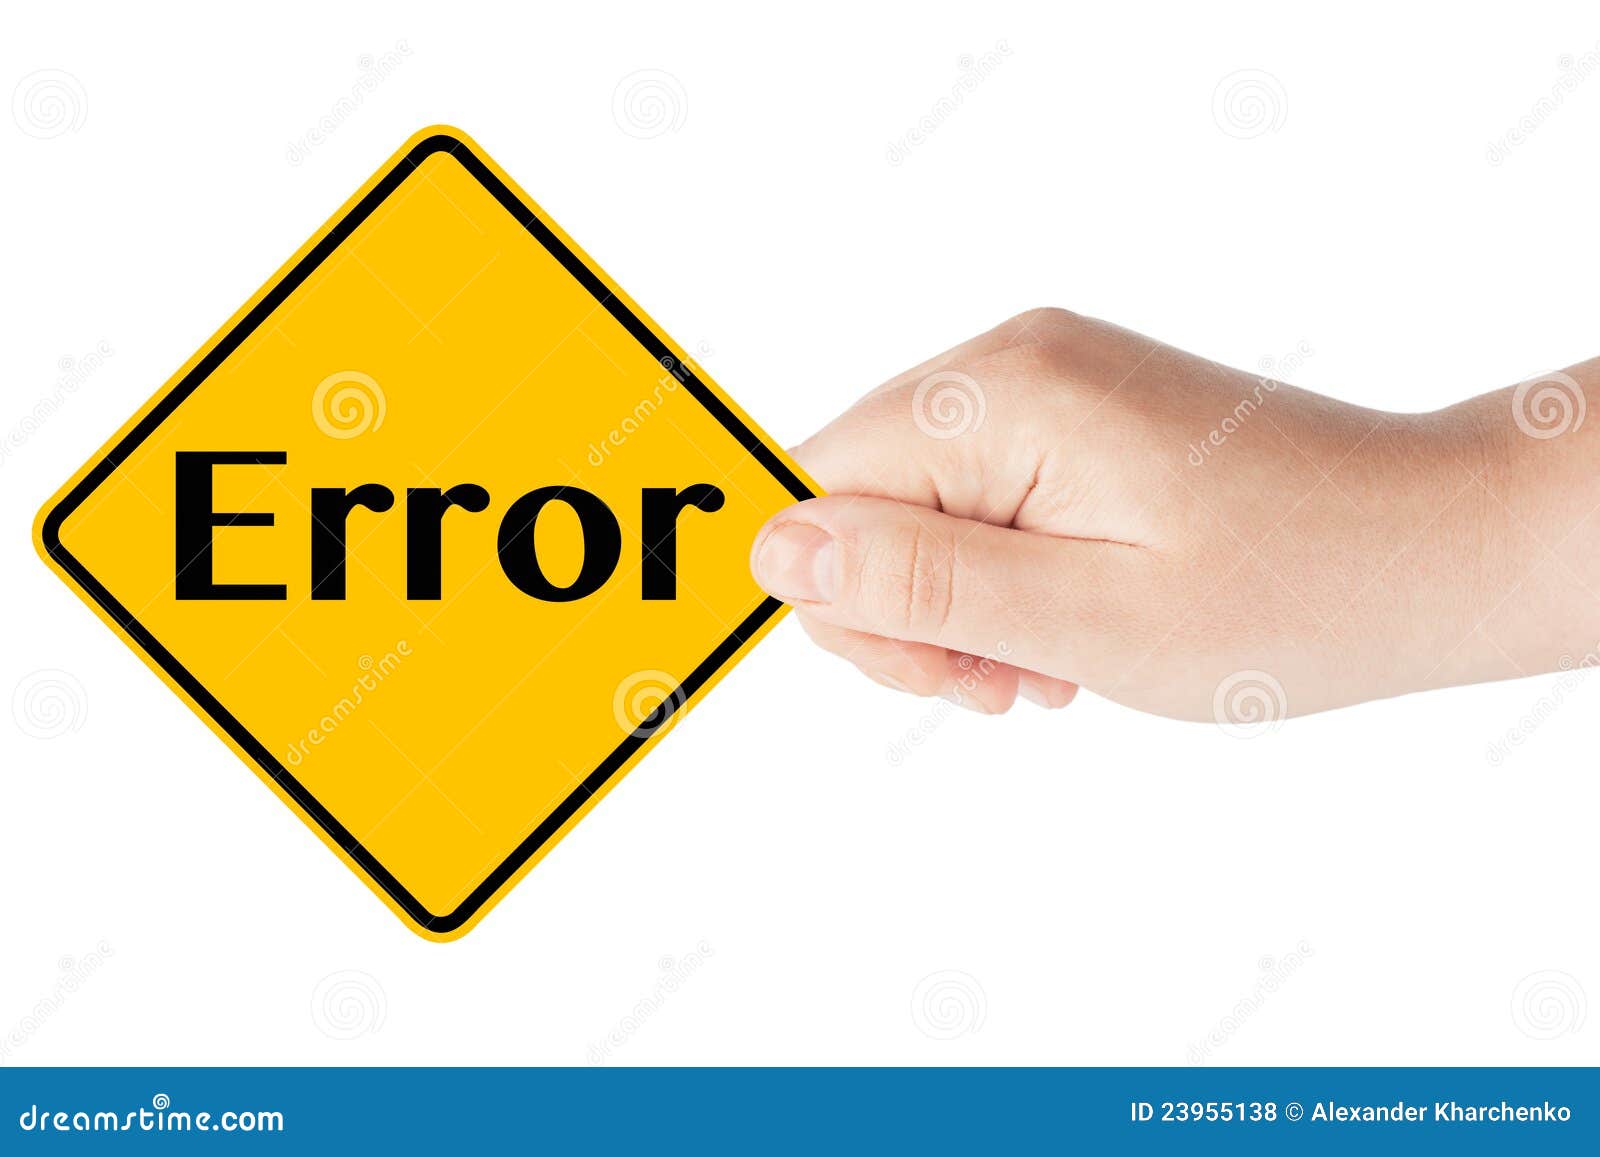 error sign with hand